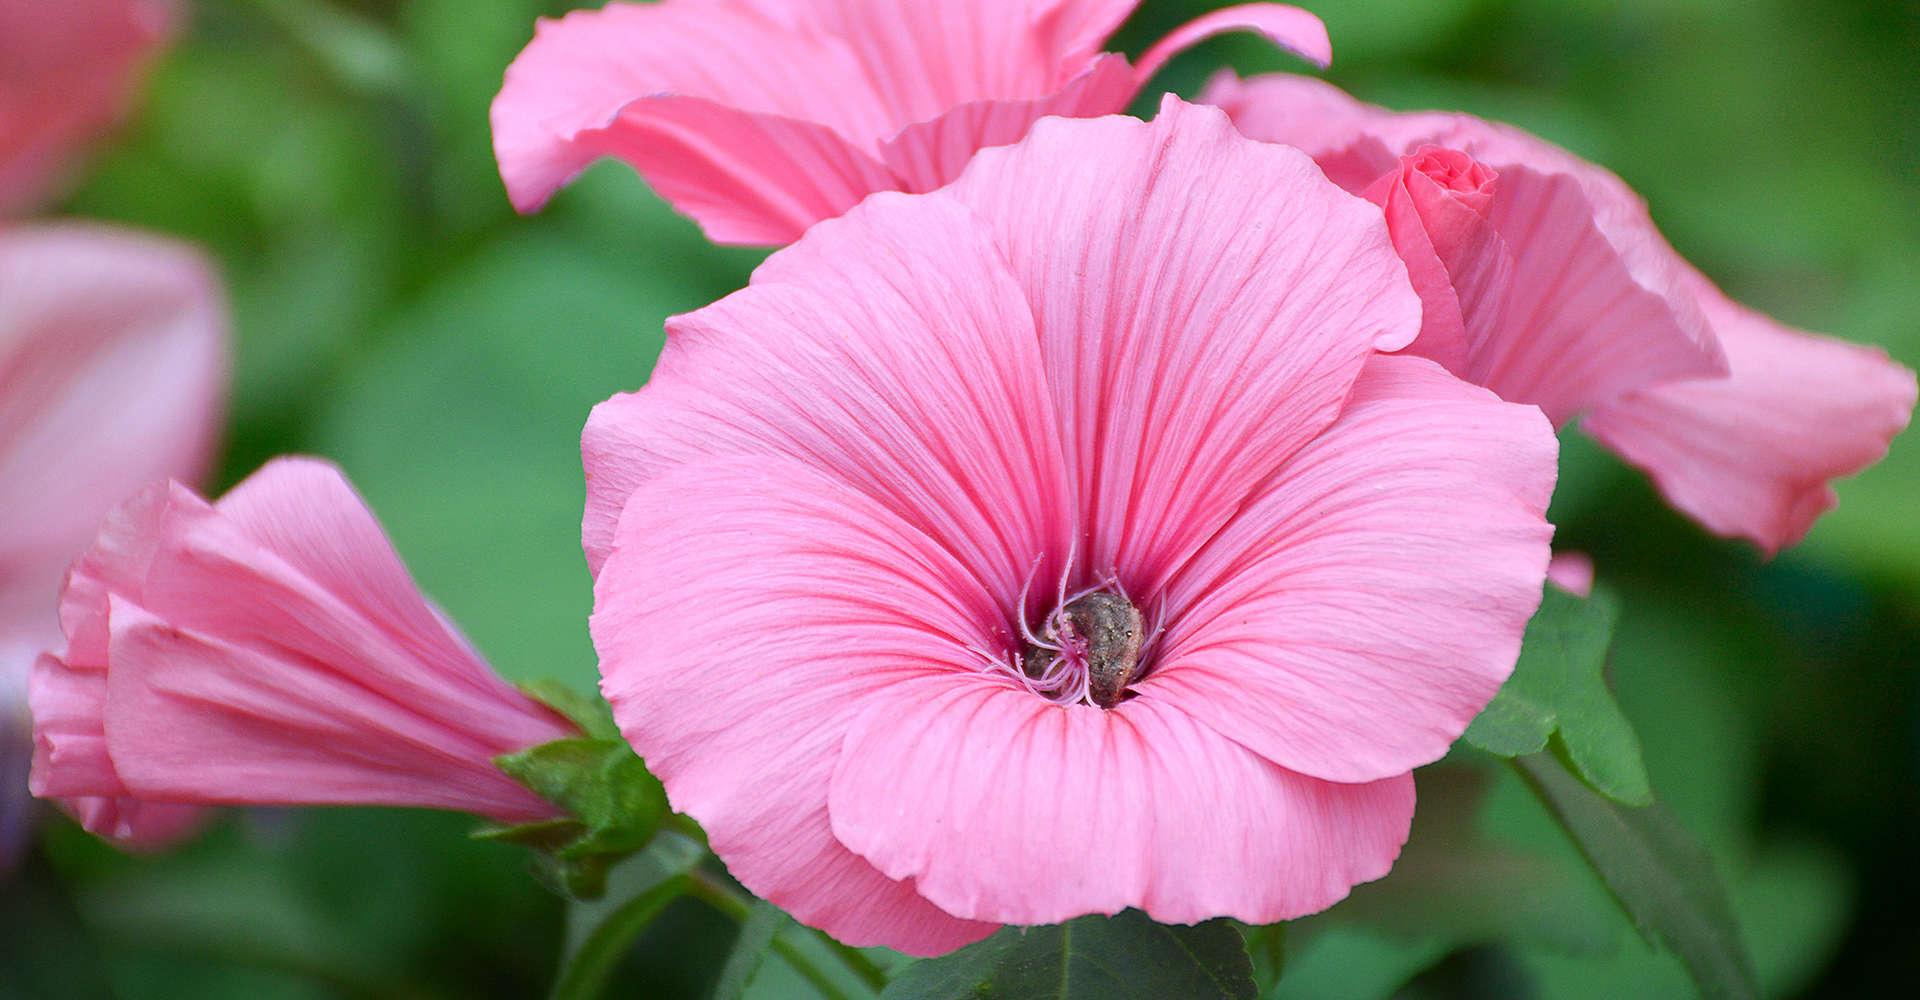 Lavatera Care Guide: How to Grow Tree Mallows